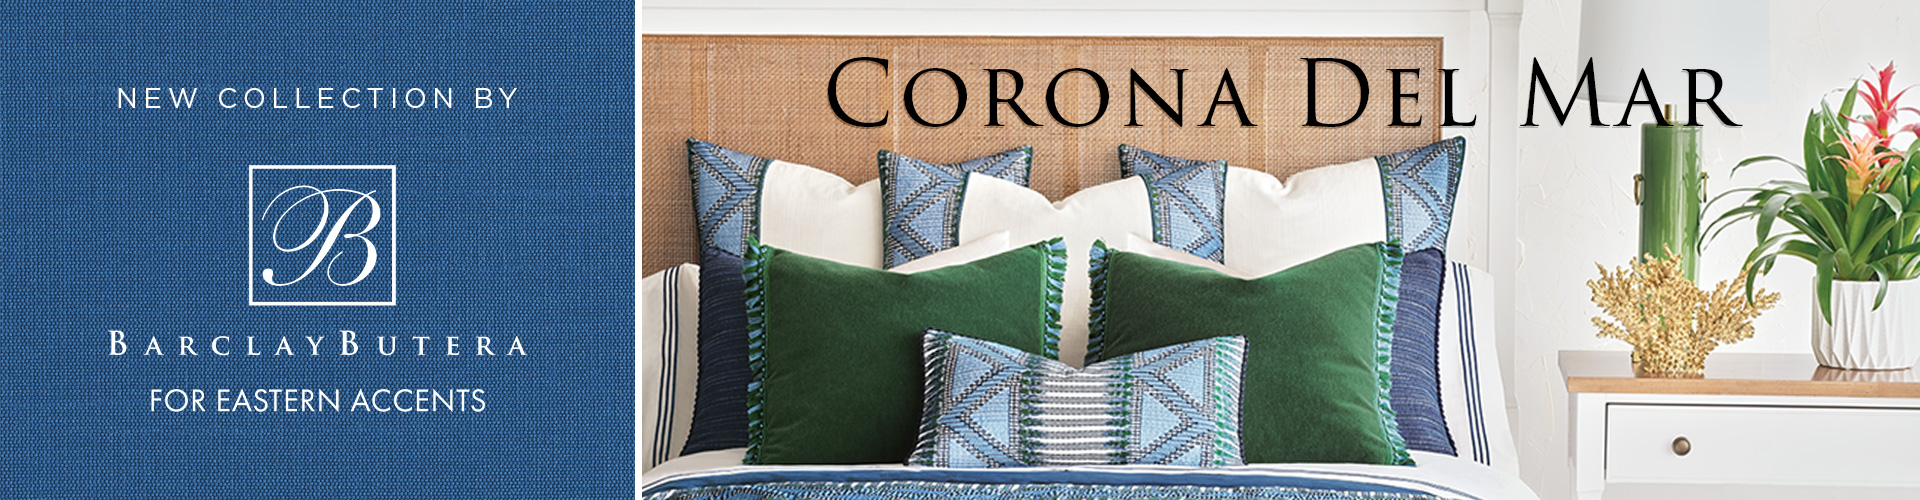 New Collection by Barclay Butera for Eastern Accents Corona Del Mar